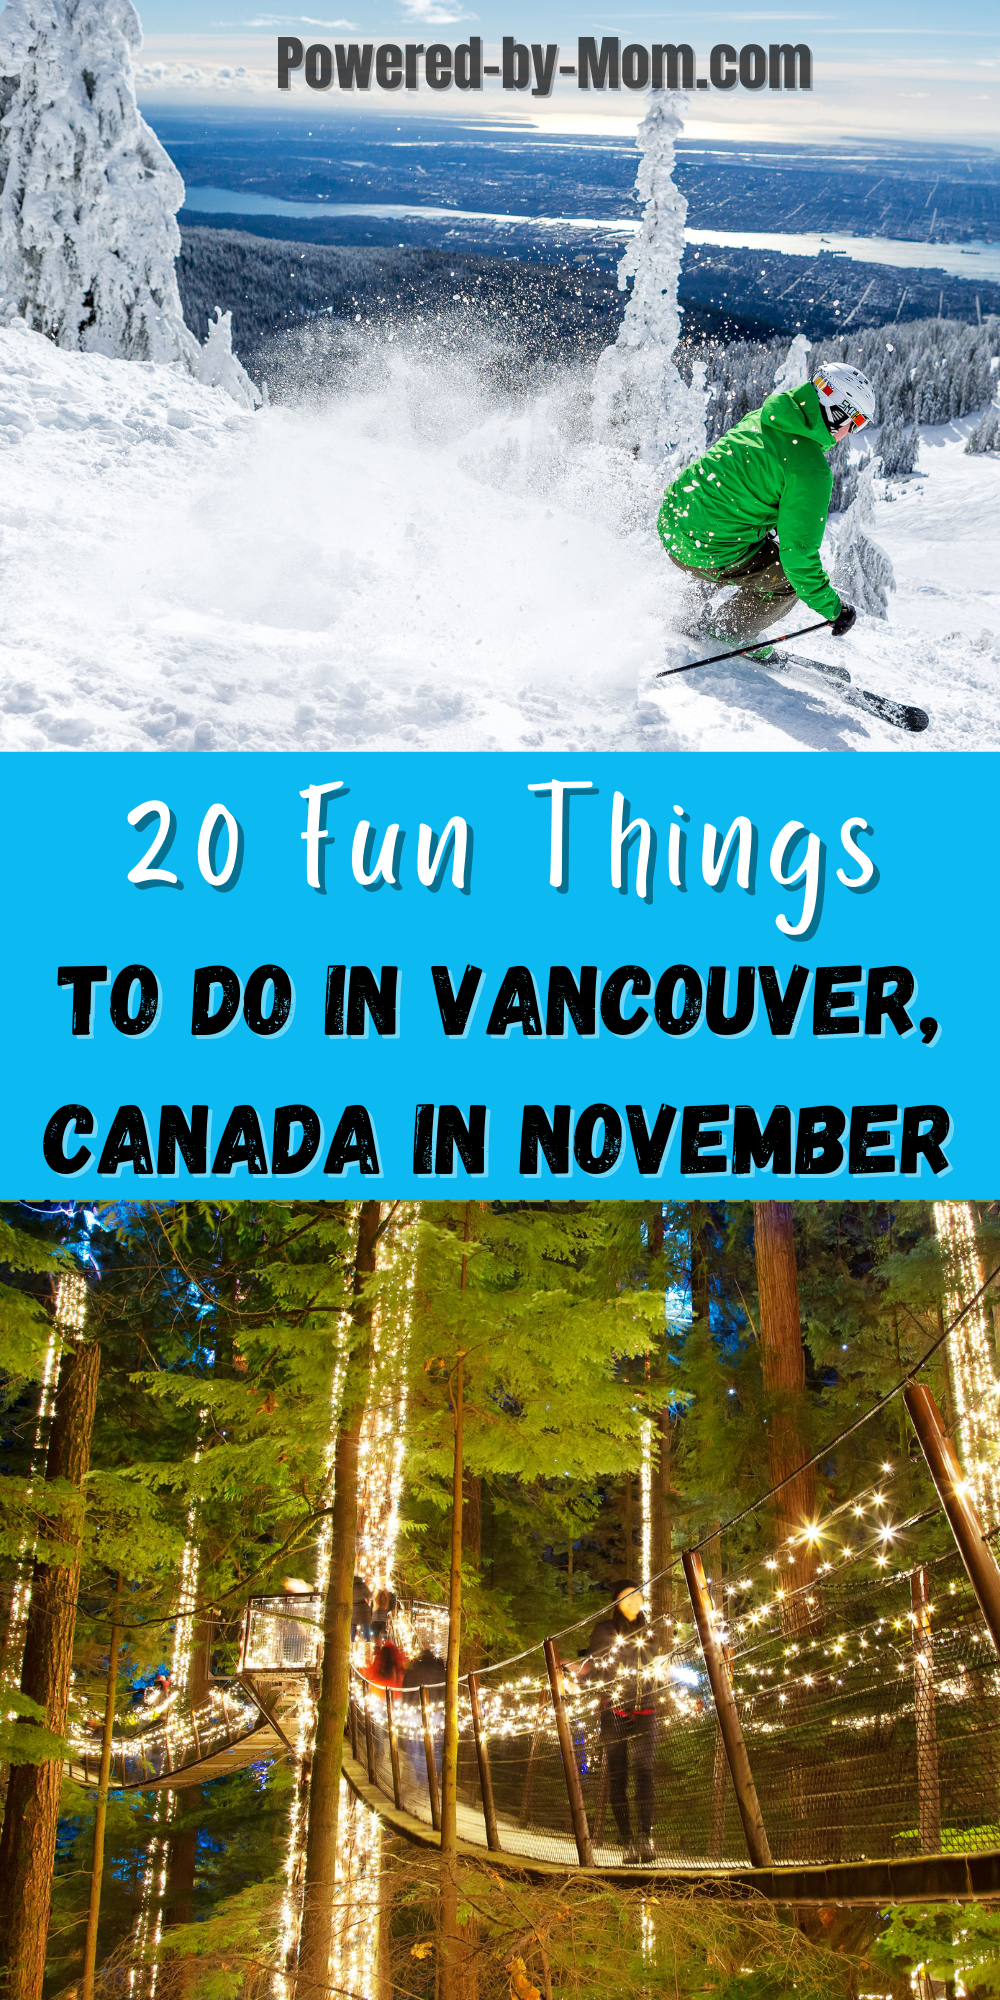 November is a great time to visit Vancouver. The weather is still beautiful, and the winter holidays are just around the corner, which brings with it several unique and fun things to do in Vancouver, Canada in November.